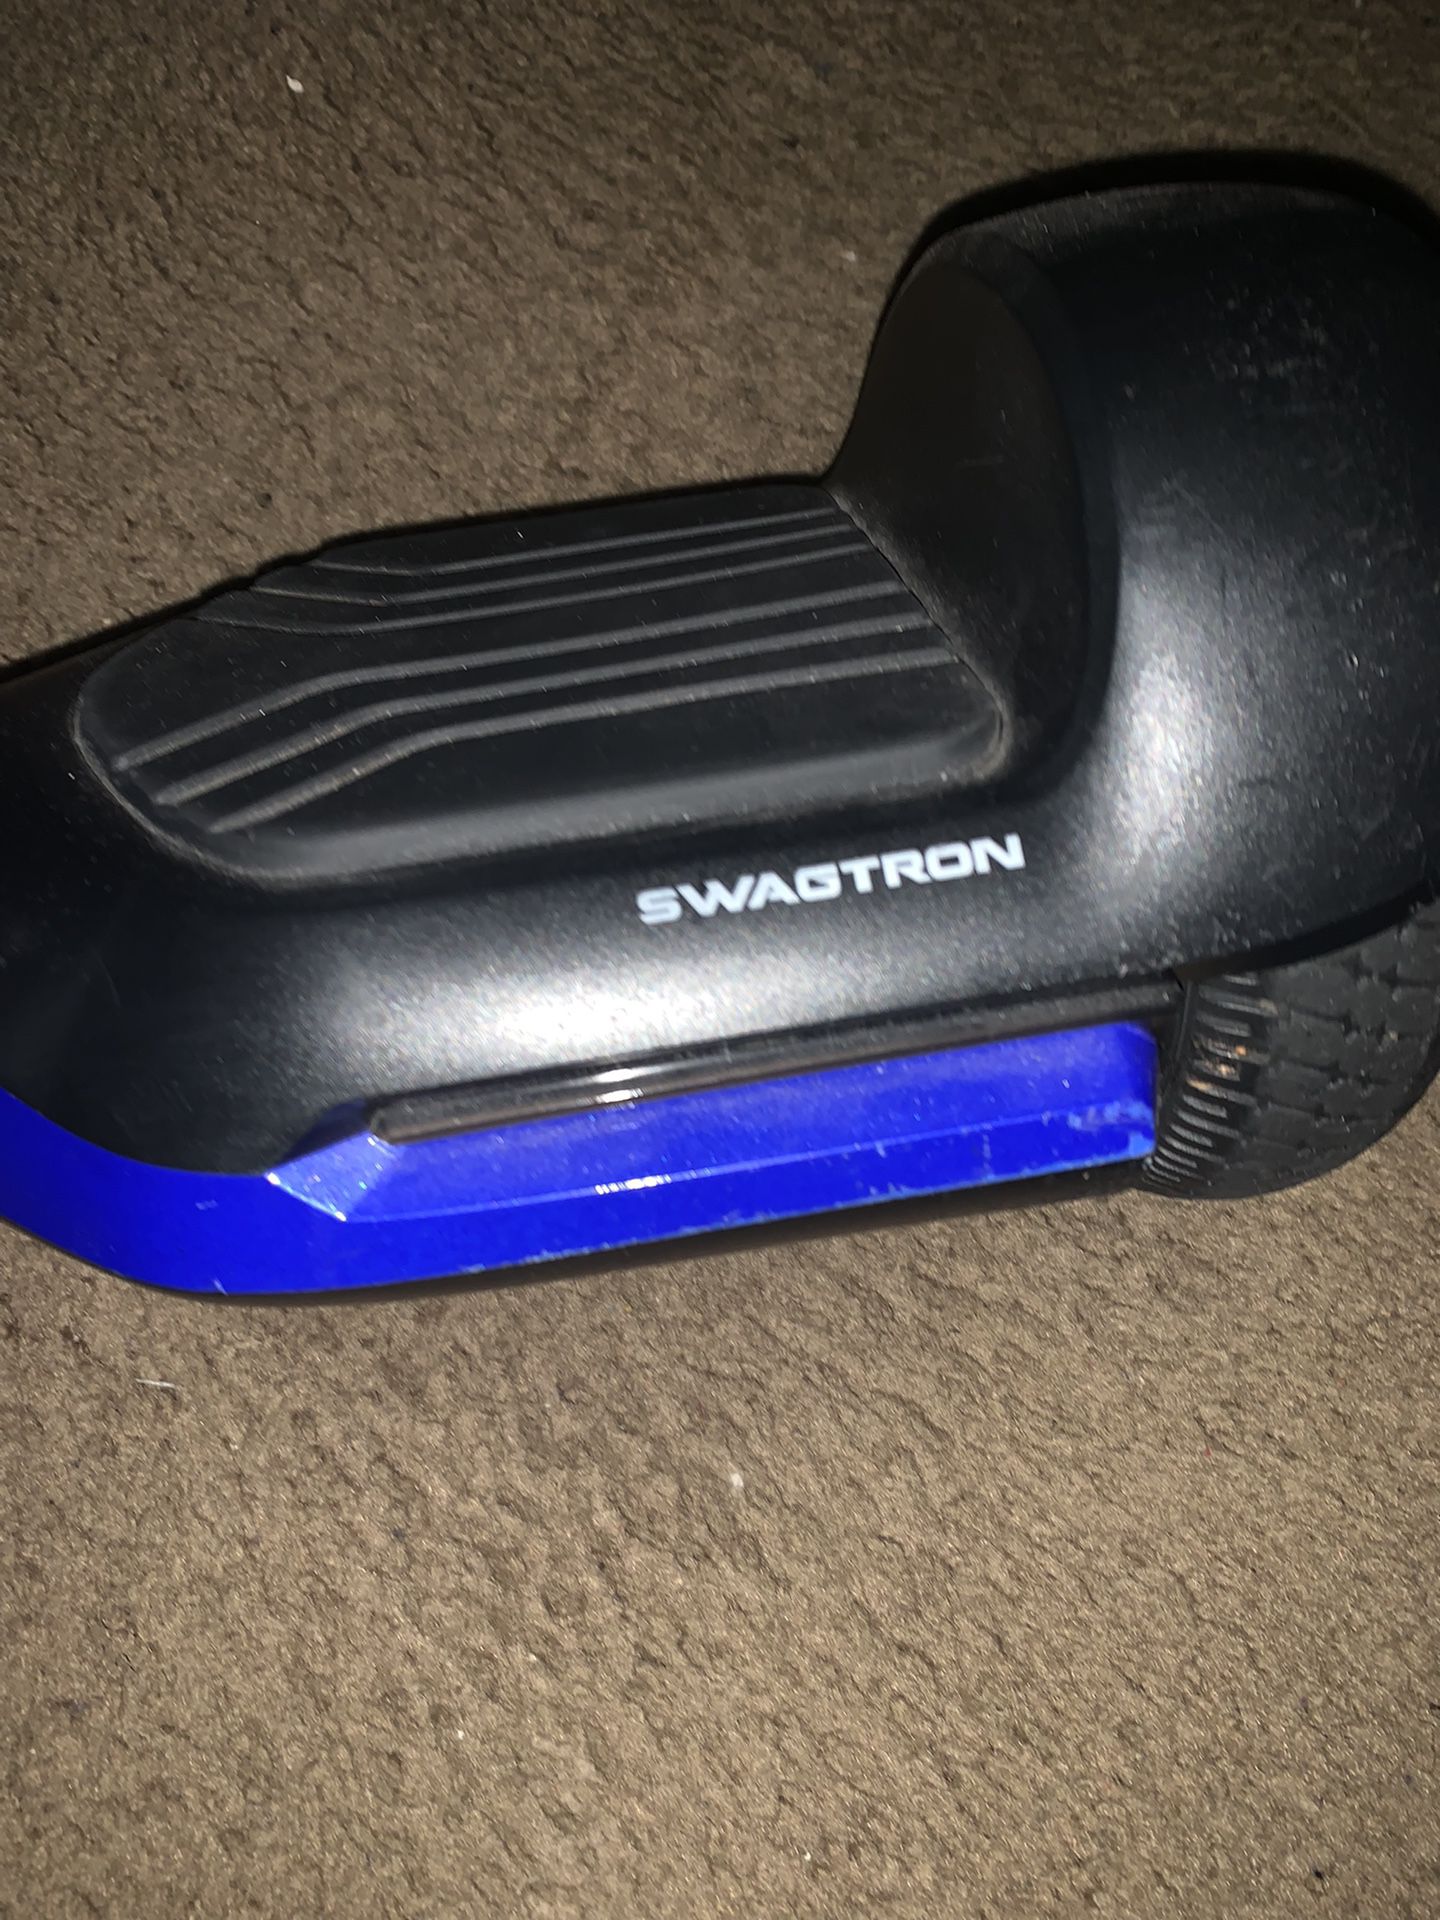 Swagtron Bluetooth Hoverboard 